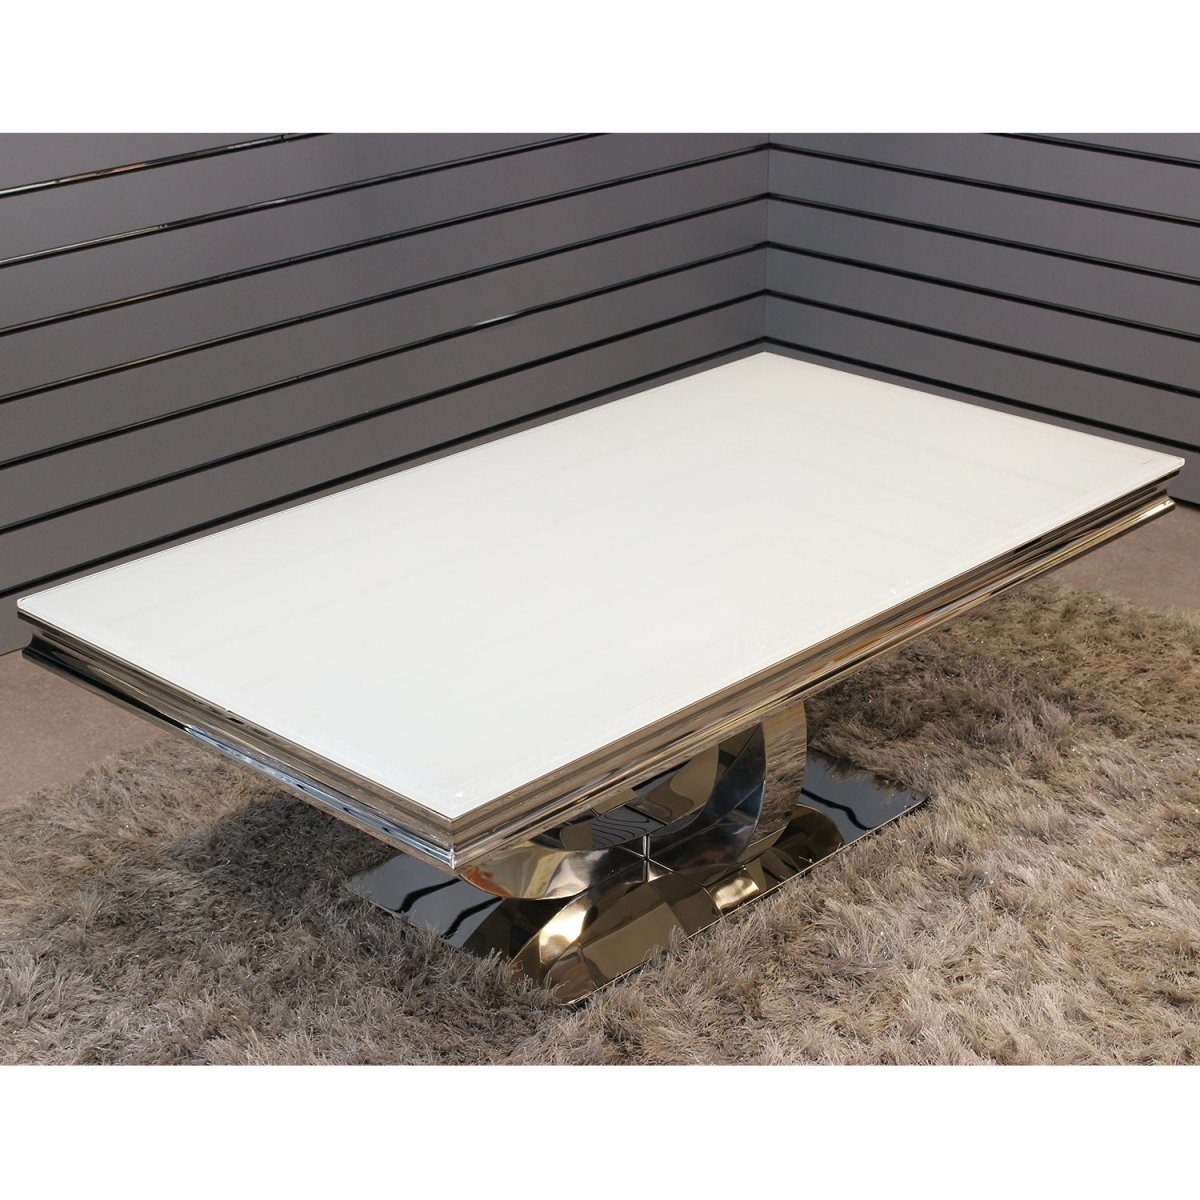 Lunar White Glass Top Coffee Table - Bonnypack